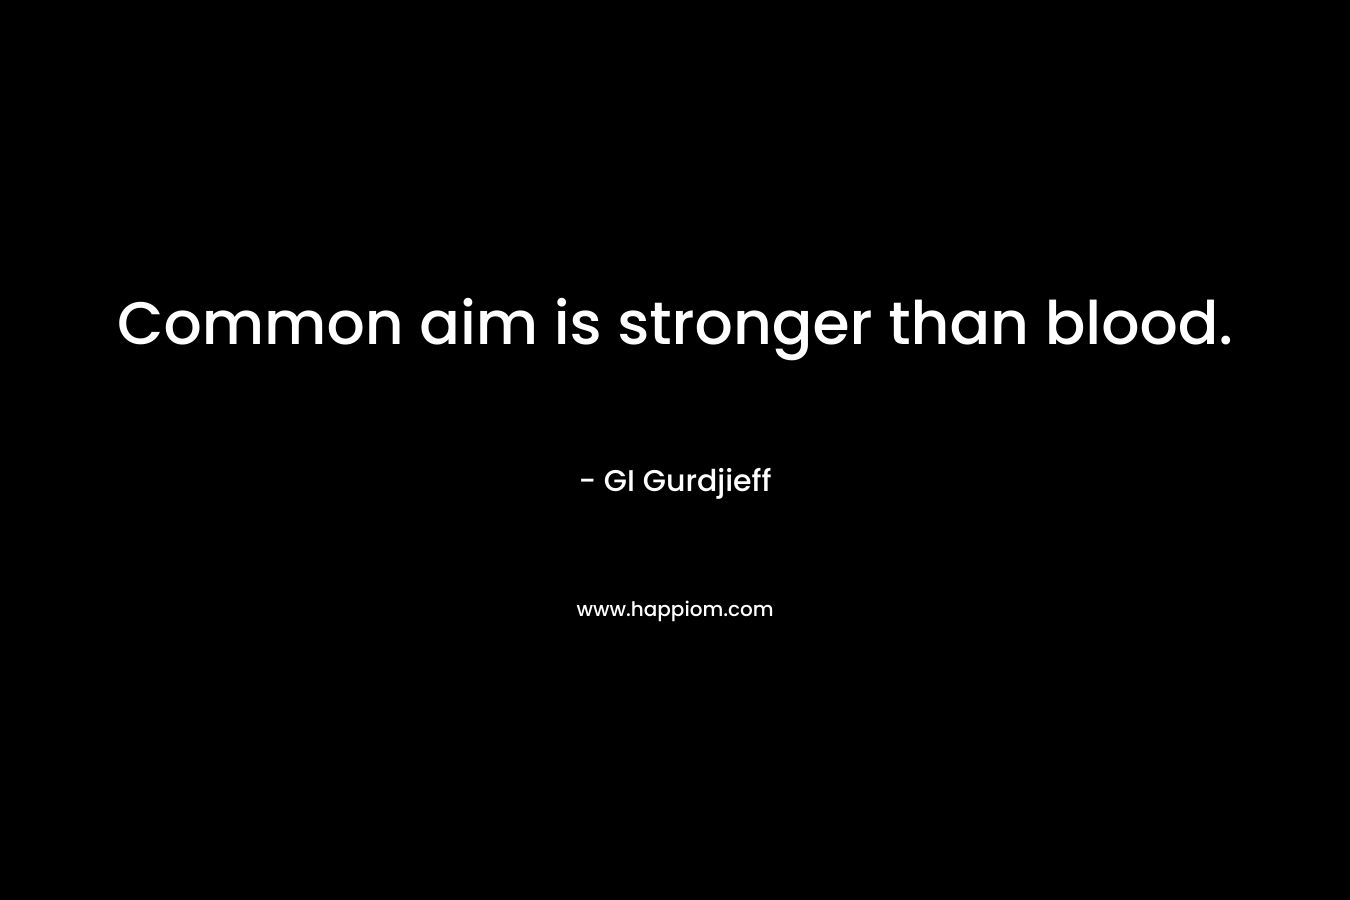 Common aim is stronger than blood.